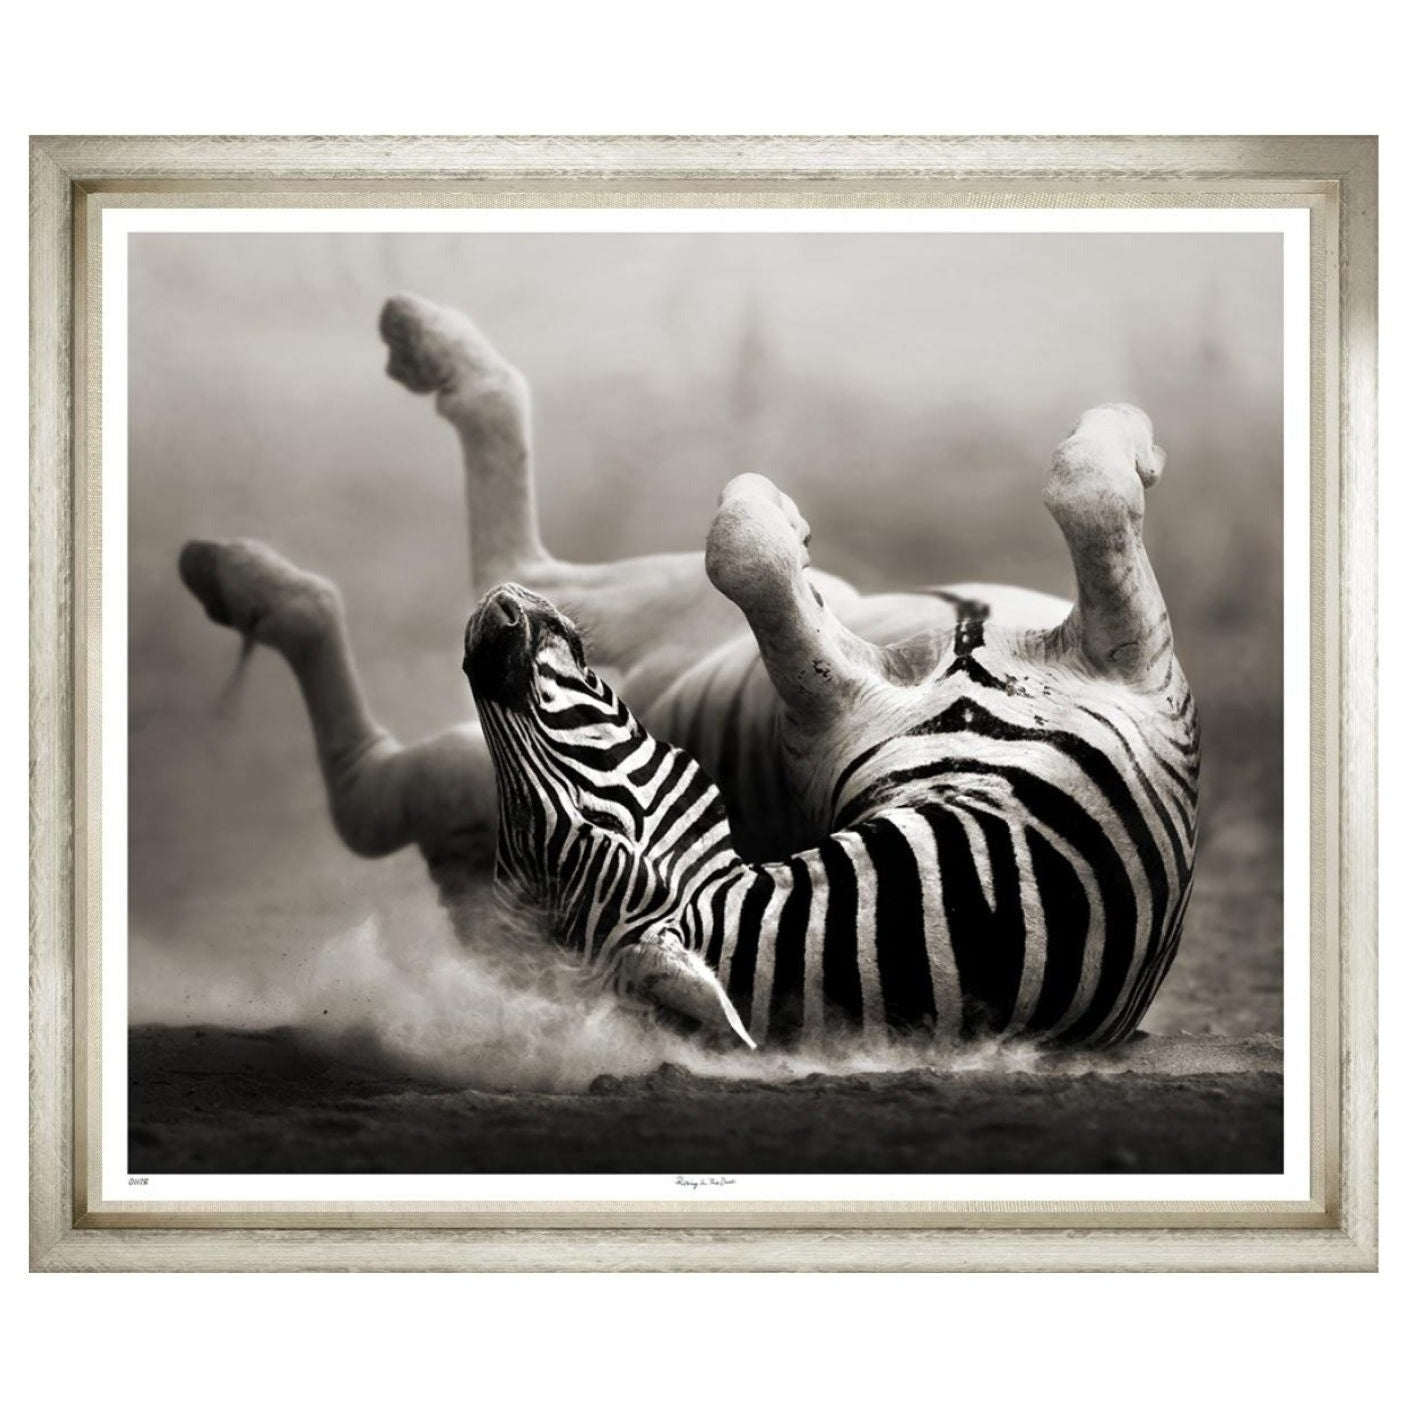 Zebra laying down scratching back on plains. Dust stirs up and background is hazy to make this a very dramatic shoot.